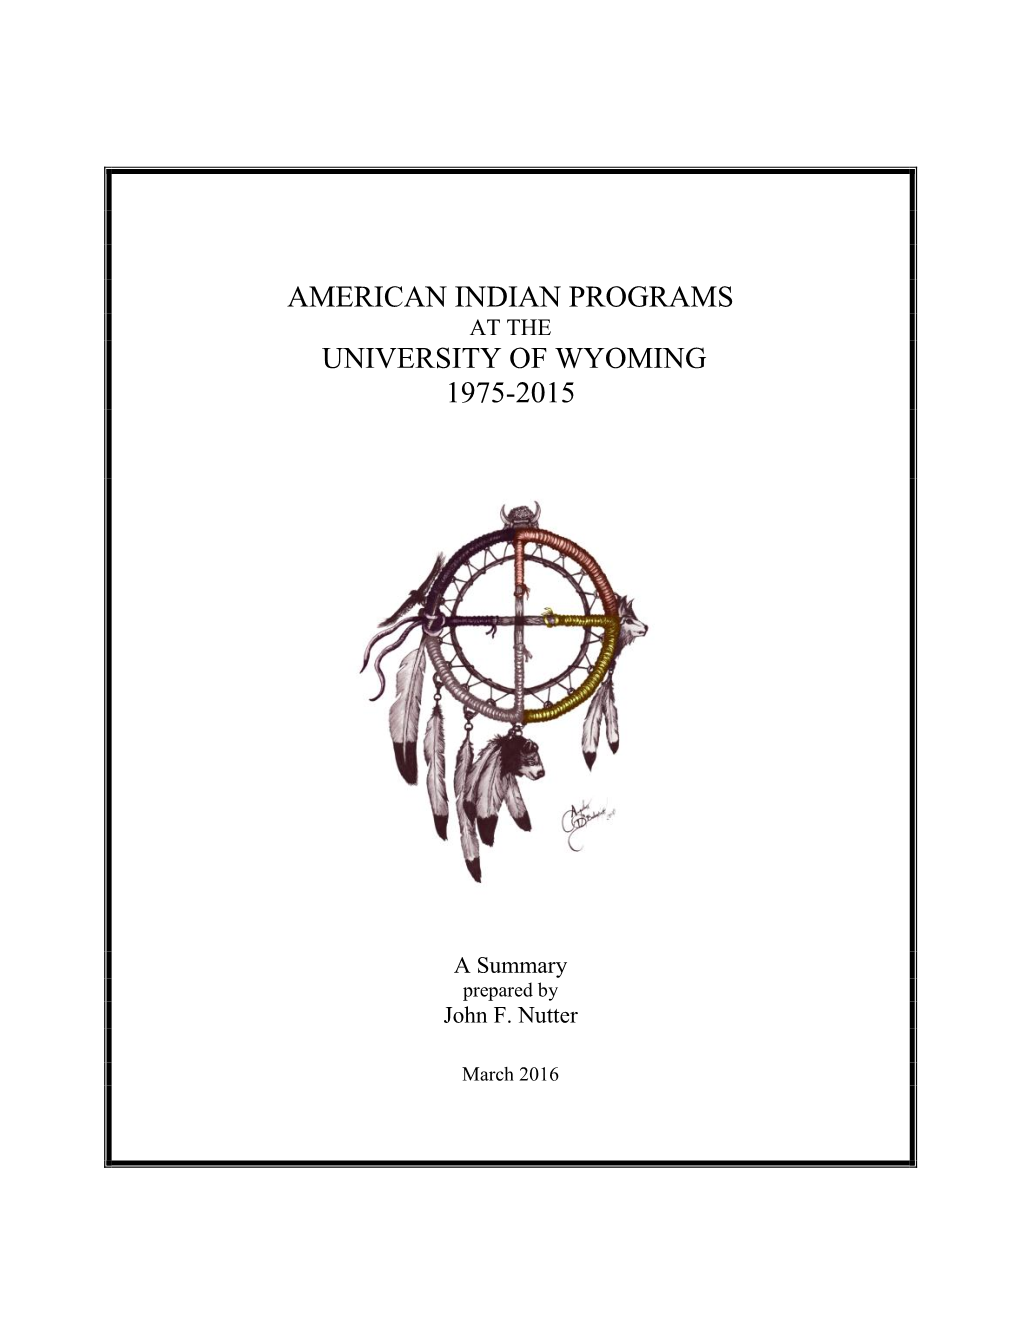 American Indian Programs at the University of Wyoming 1975-2015